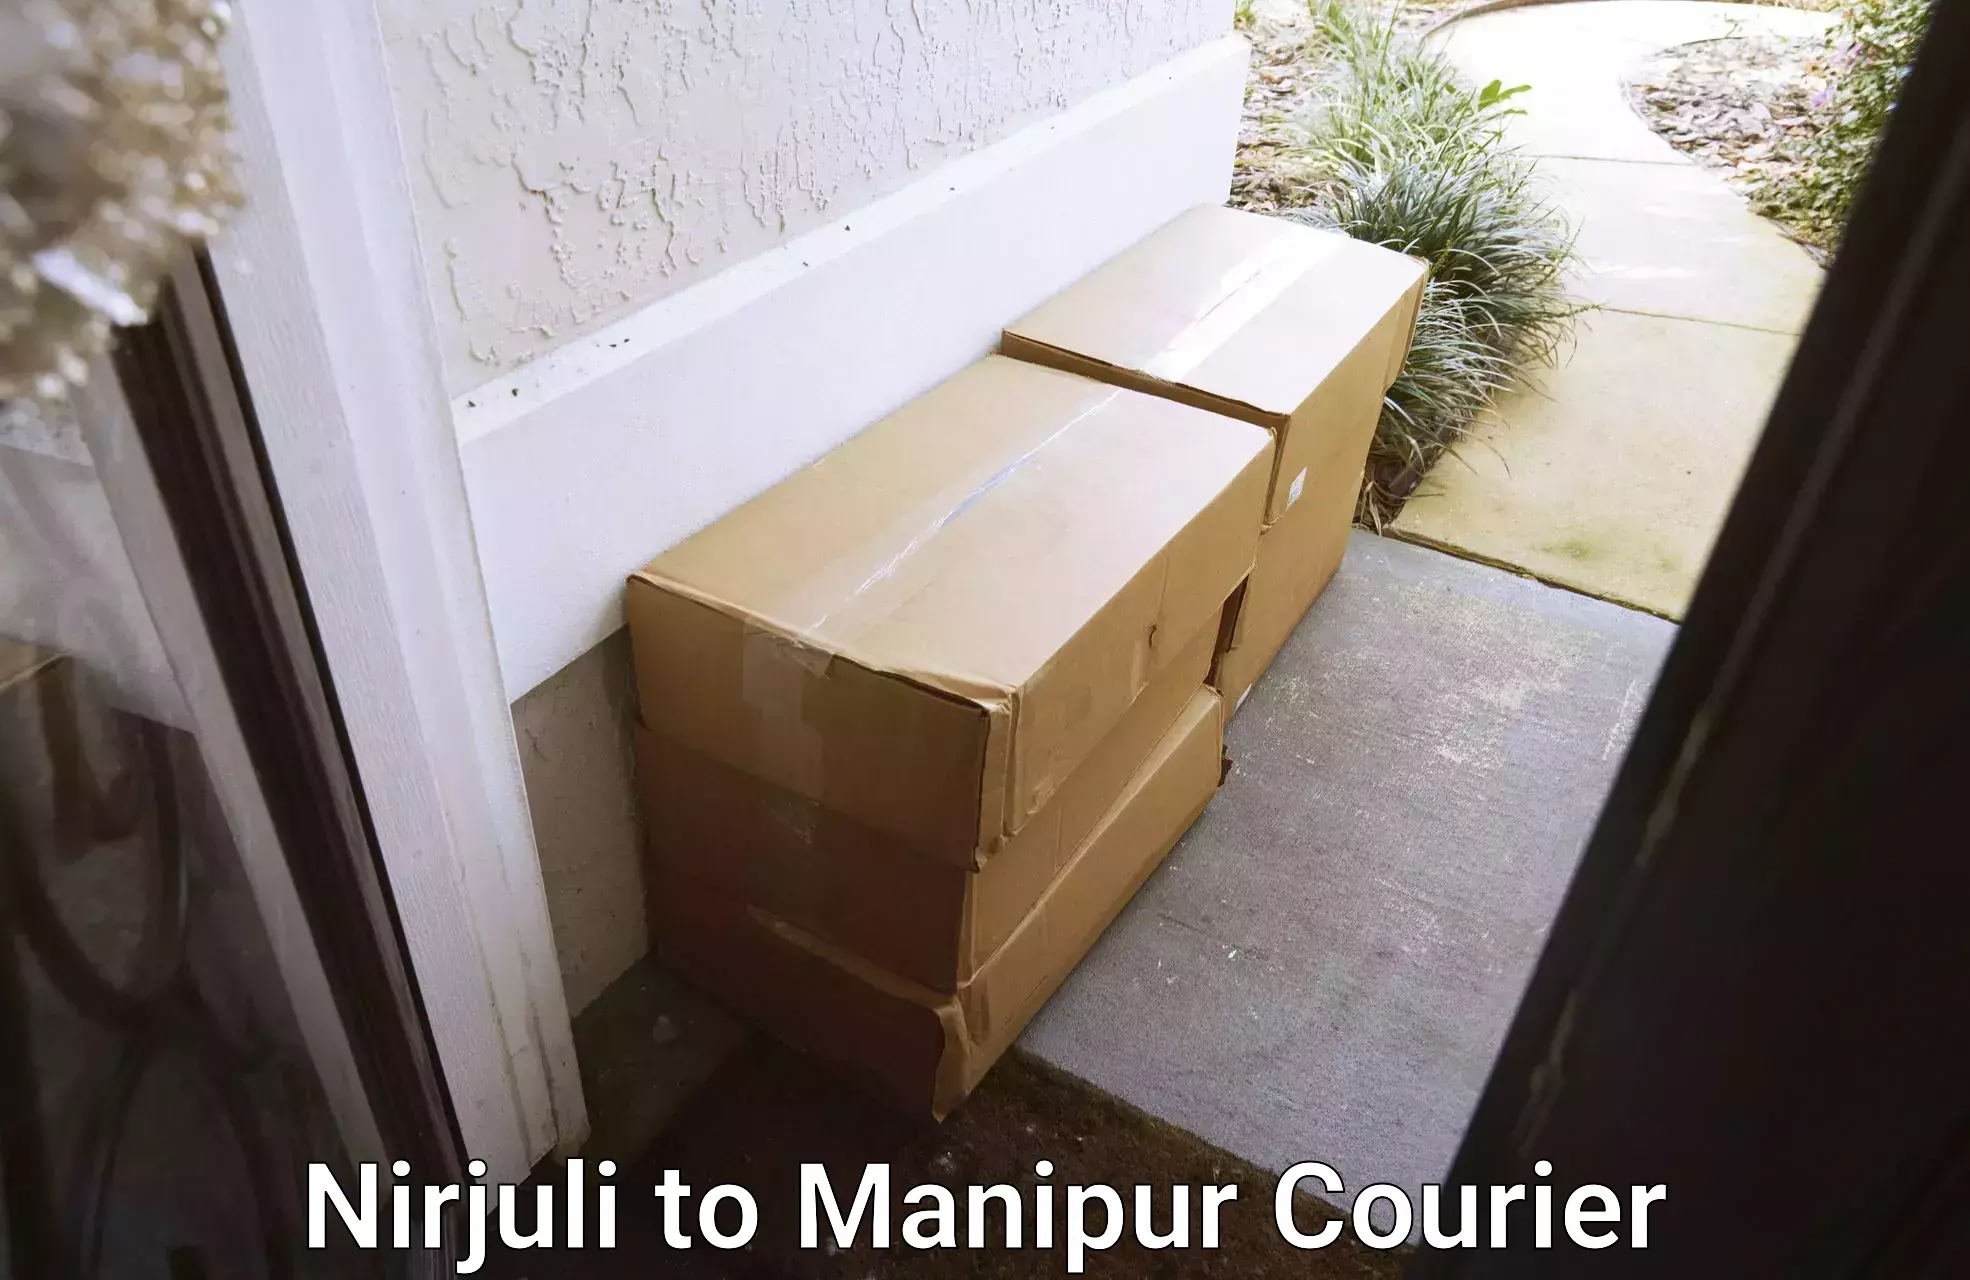 Enhanced tracking features in Nirjuli to Manipur